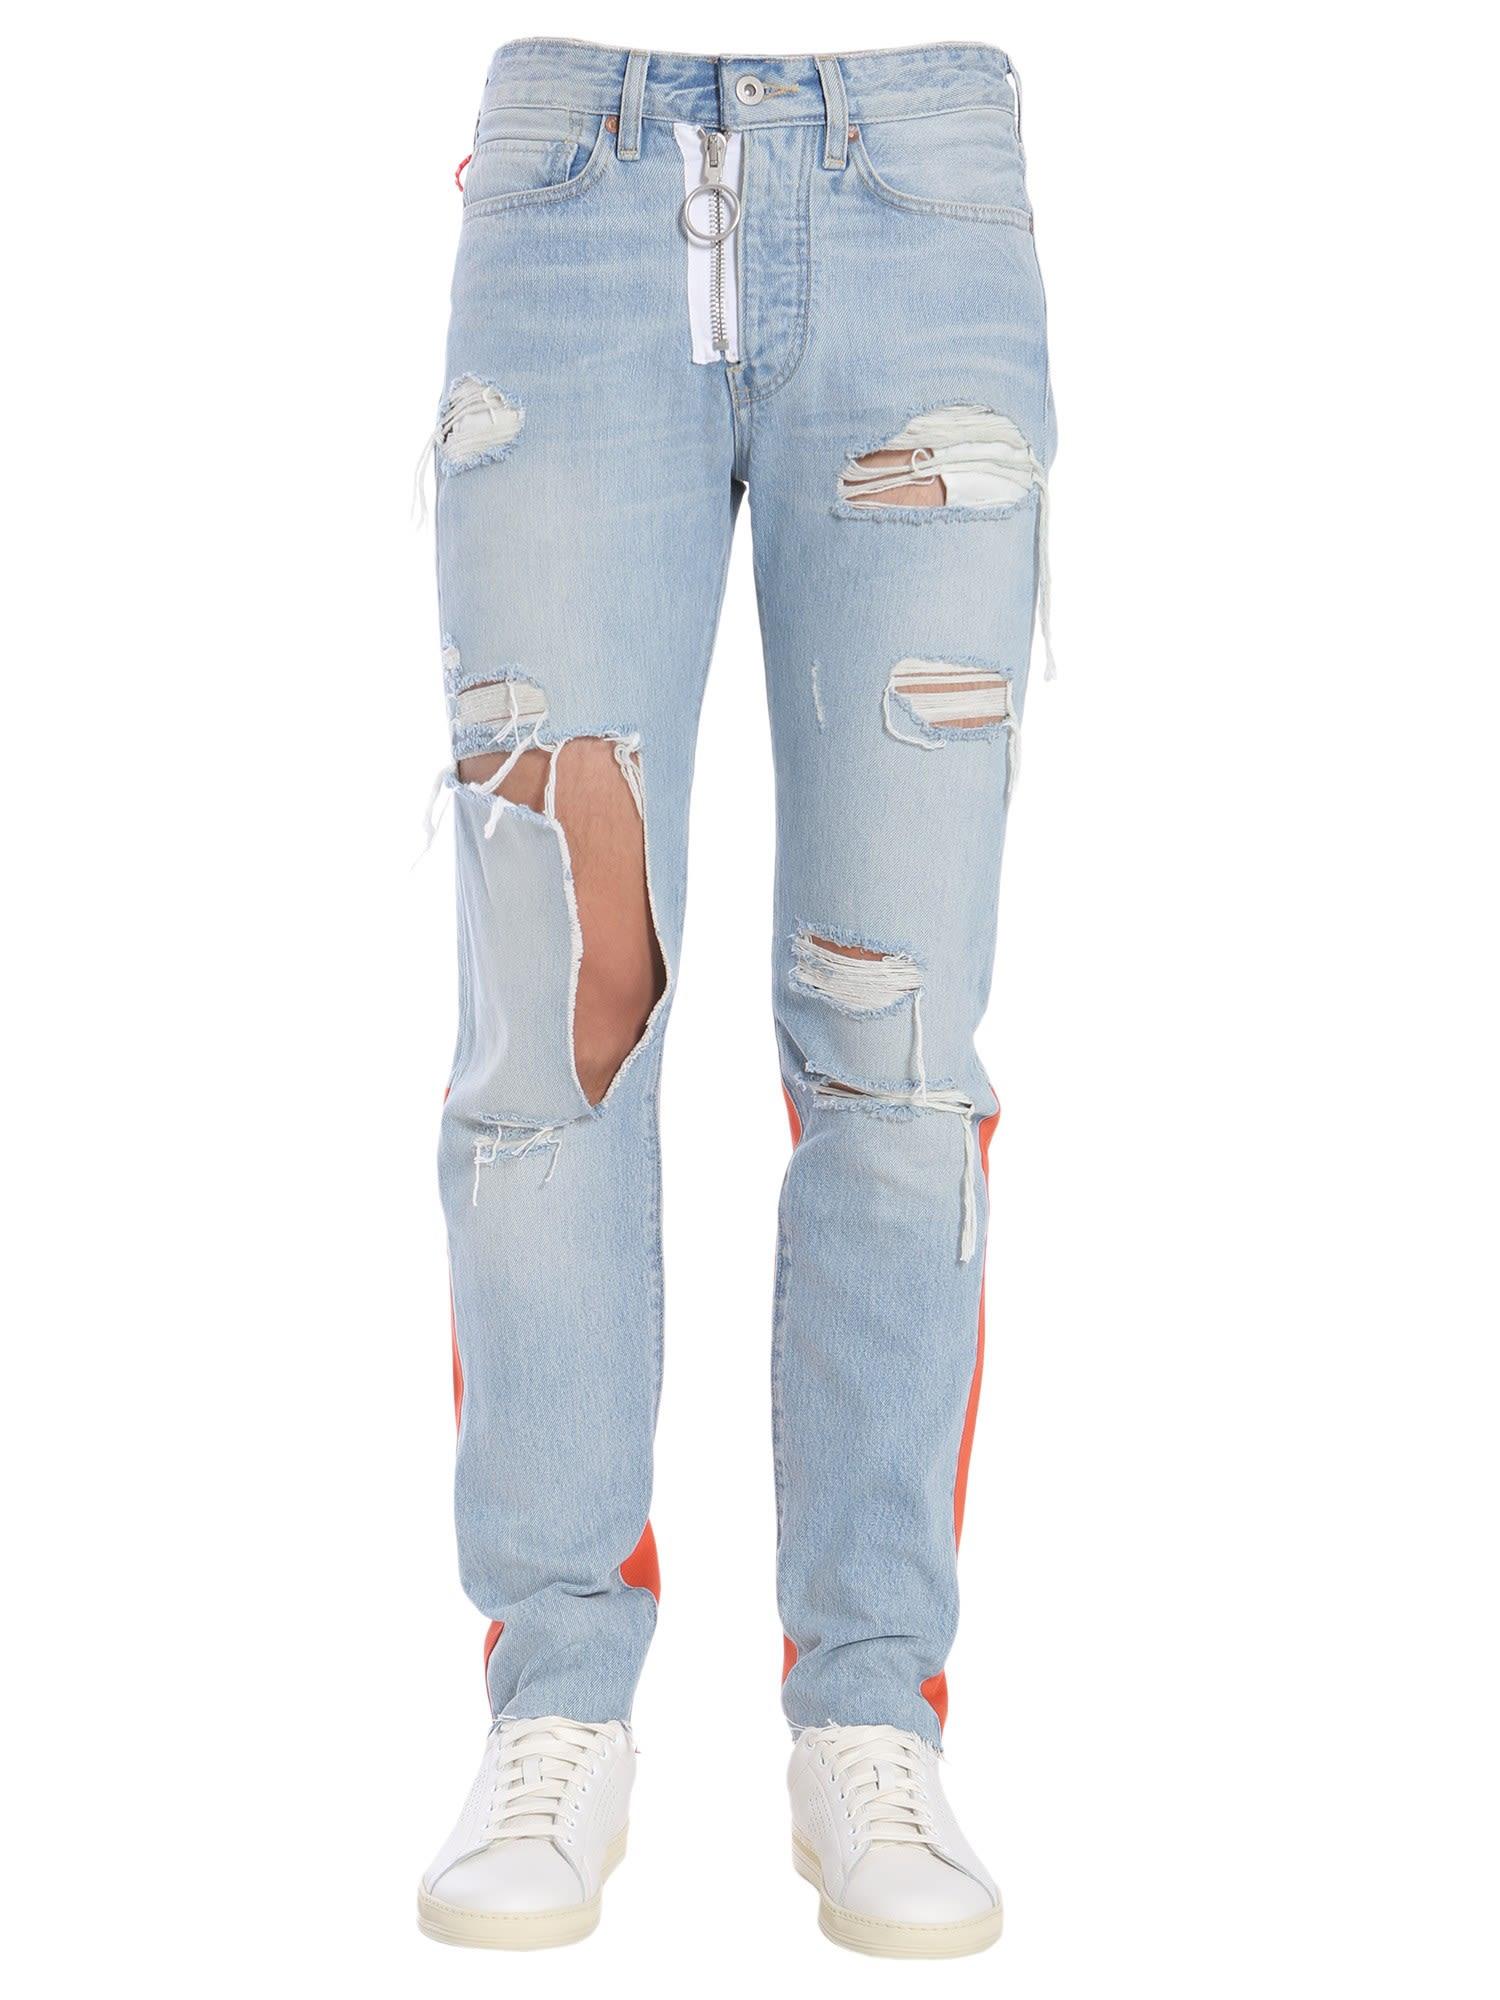 off white levis jeans